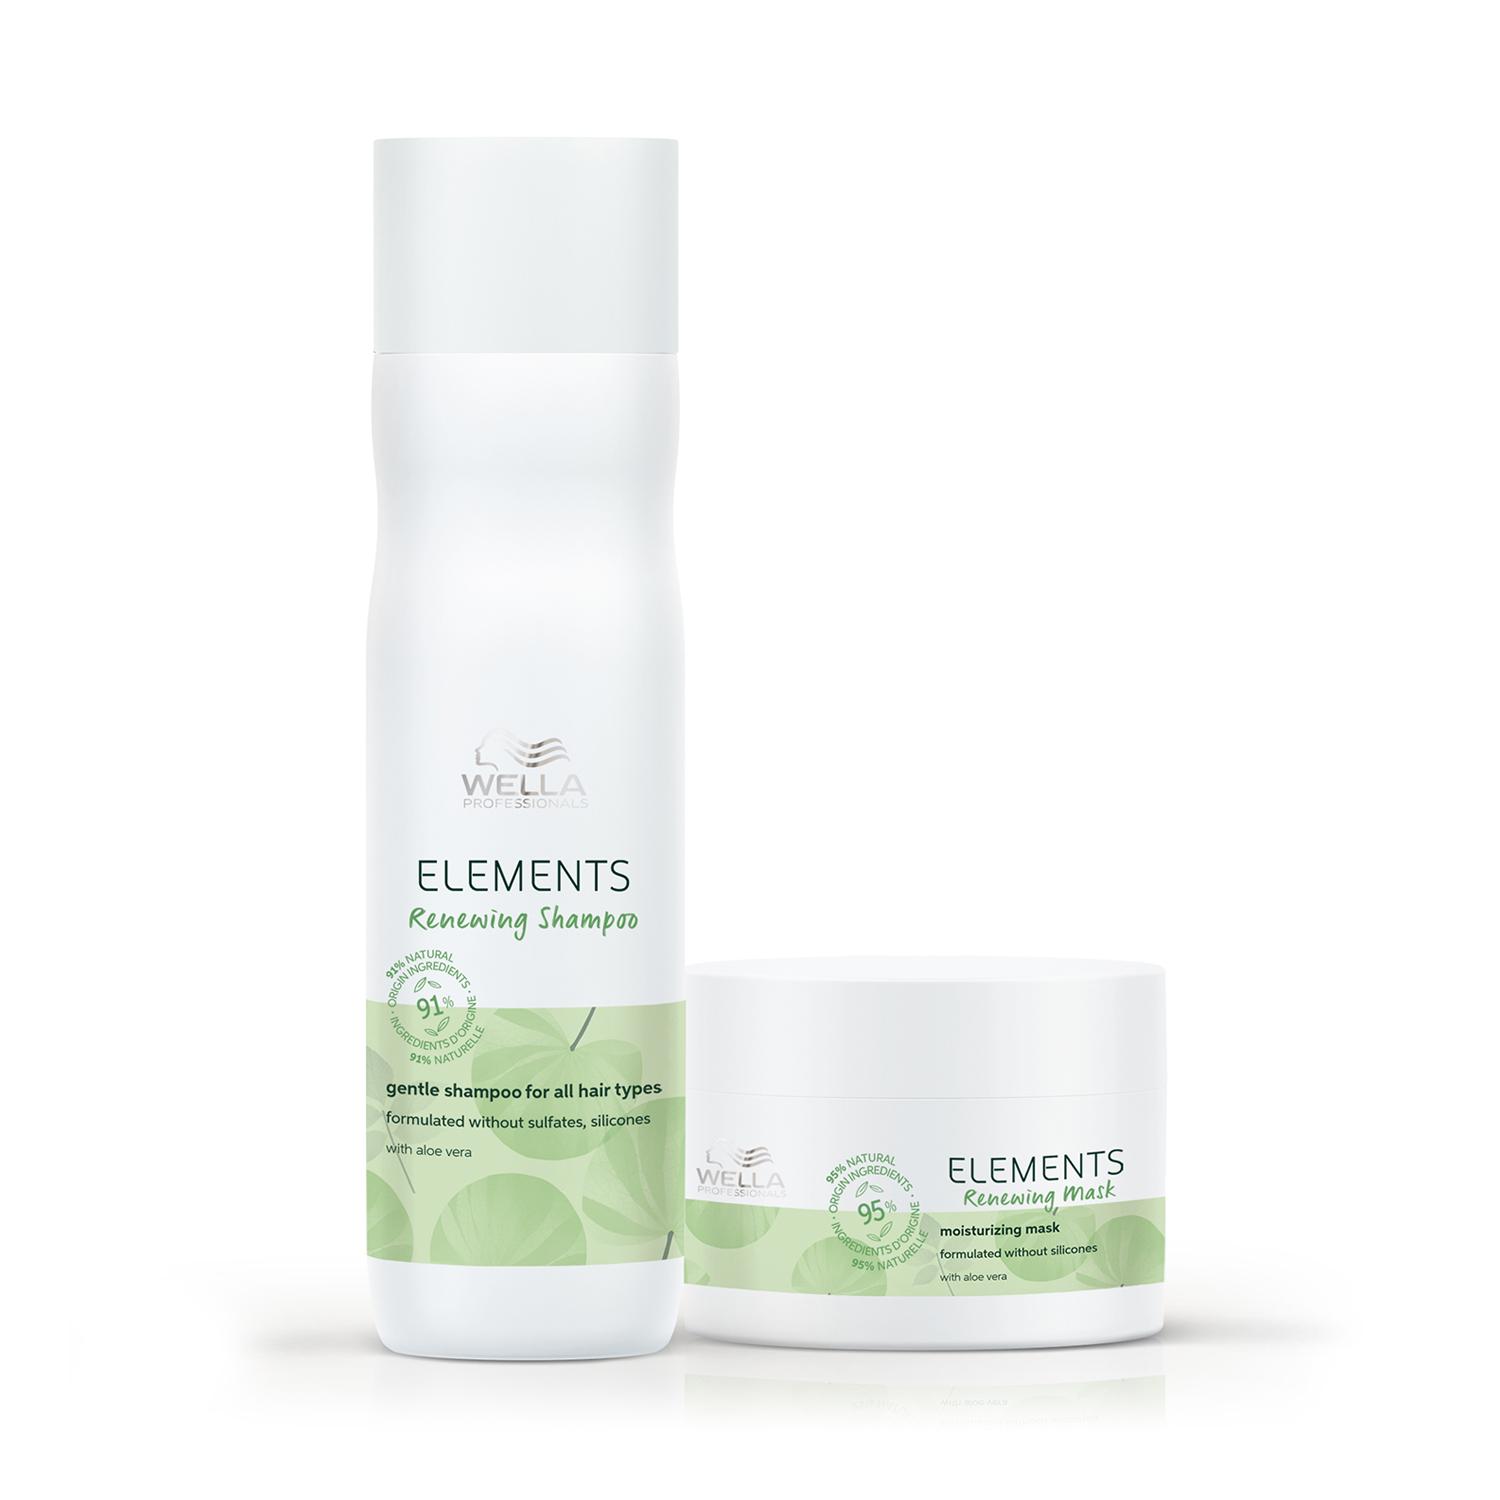 Wella Professionals | Wella Professionals Elements Sulfate free Renewing Shampoo 250 ml & Mask 150 ml for all hair types